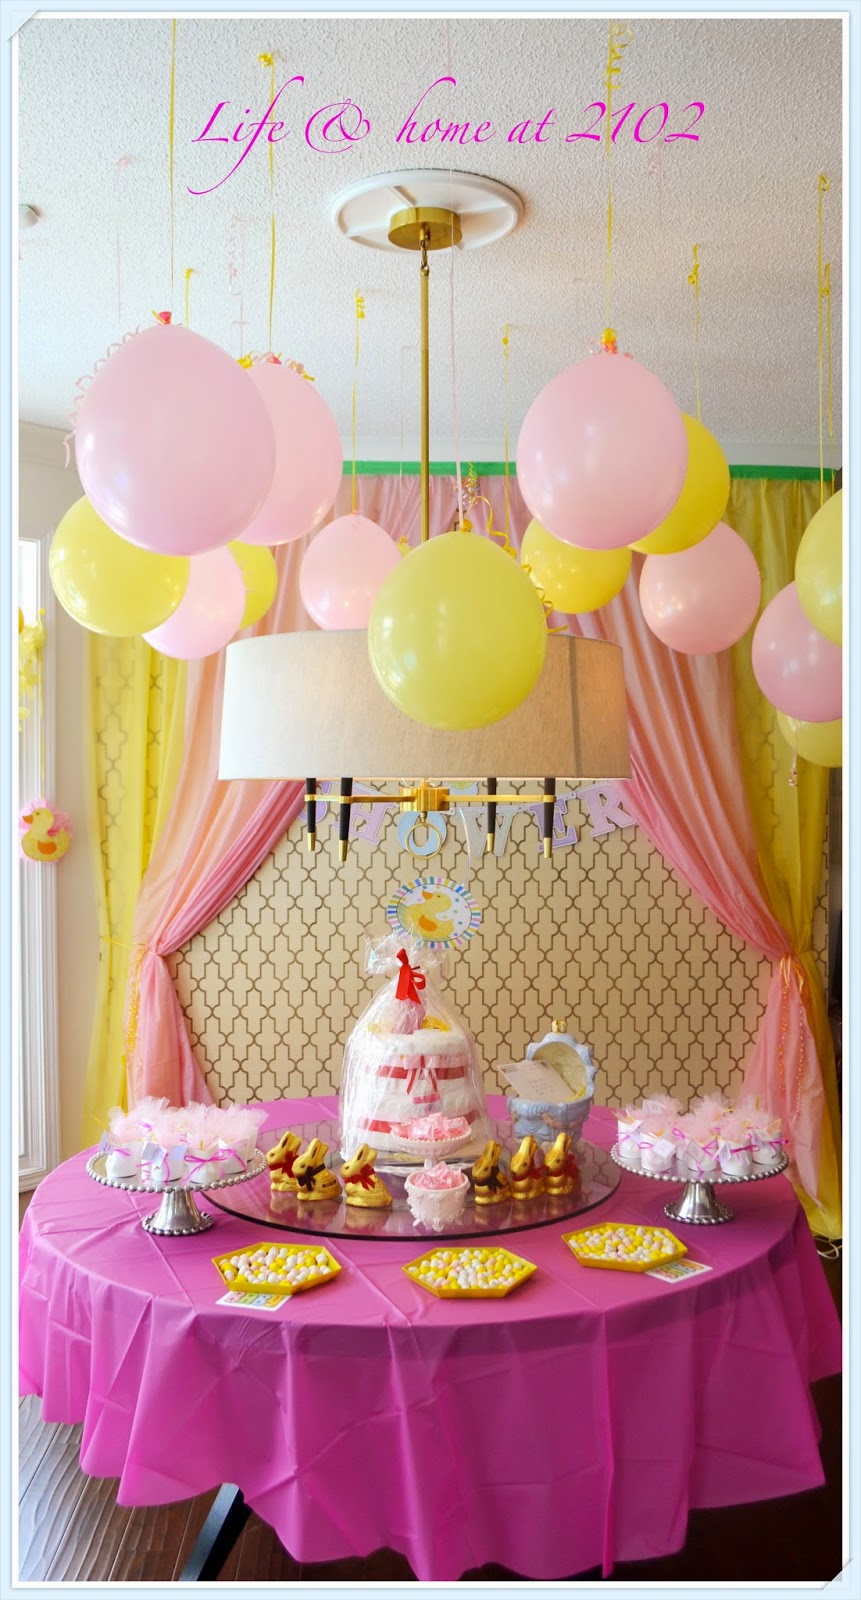 Life & Home at 2102: A Baby Shower on a Budget